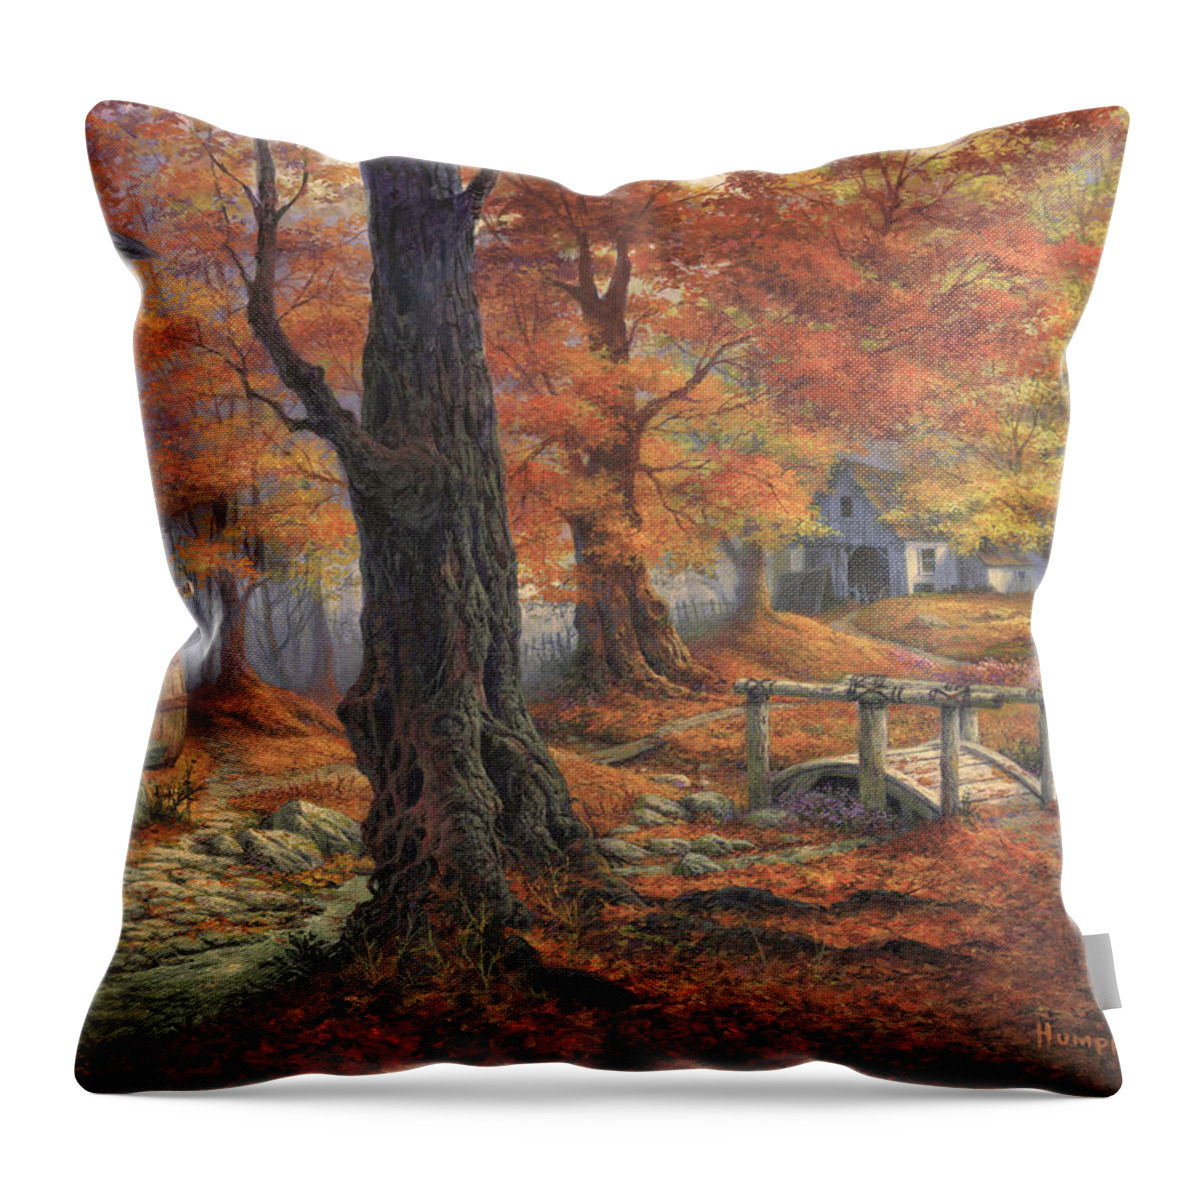 Michael Humphries Throw Pillow featuring the painting Autumn Lace by Michael Humphries